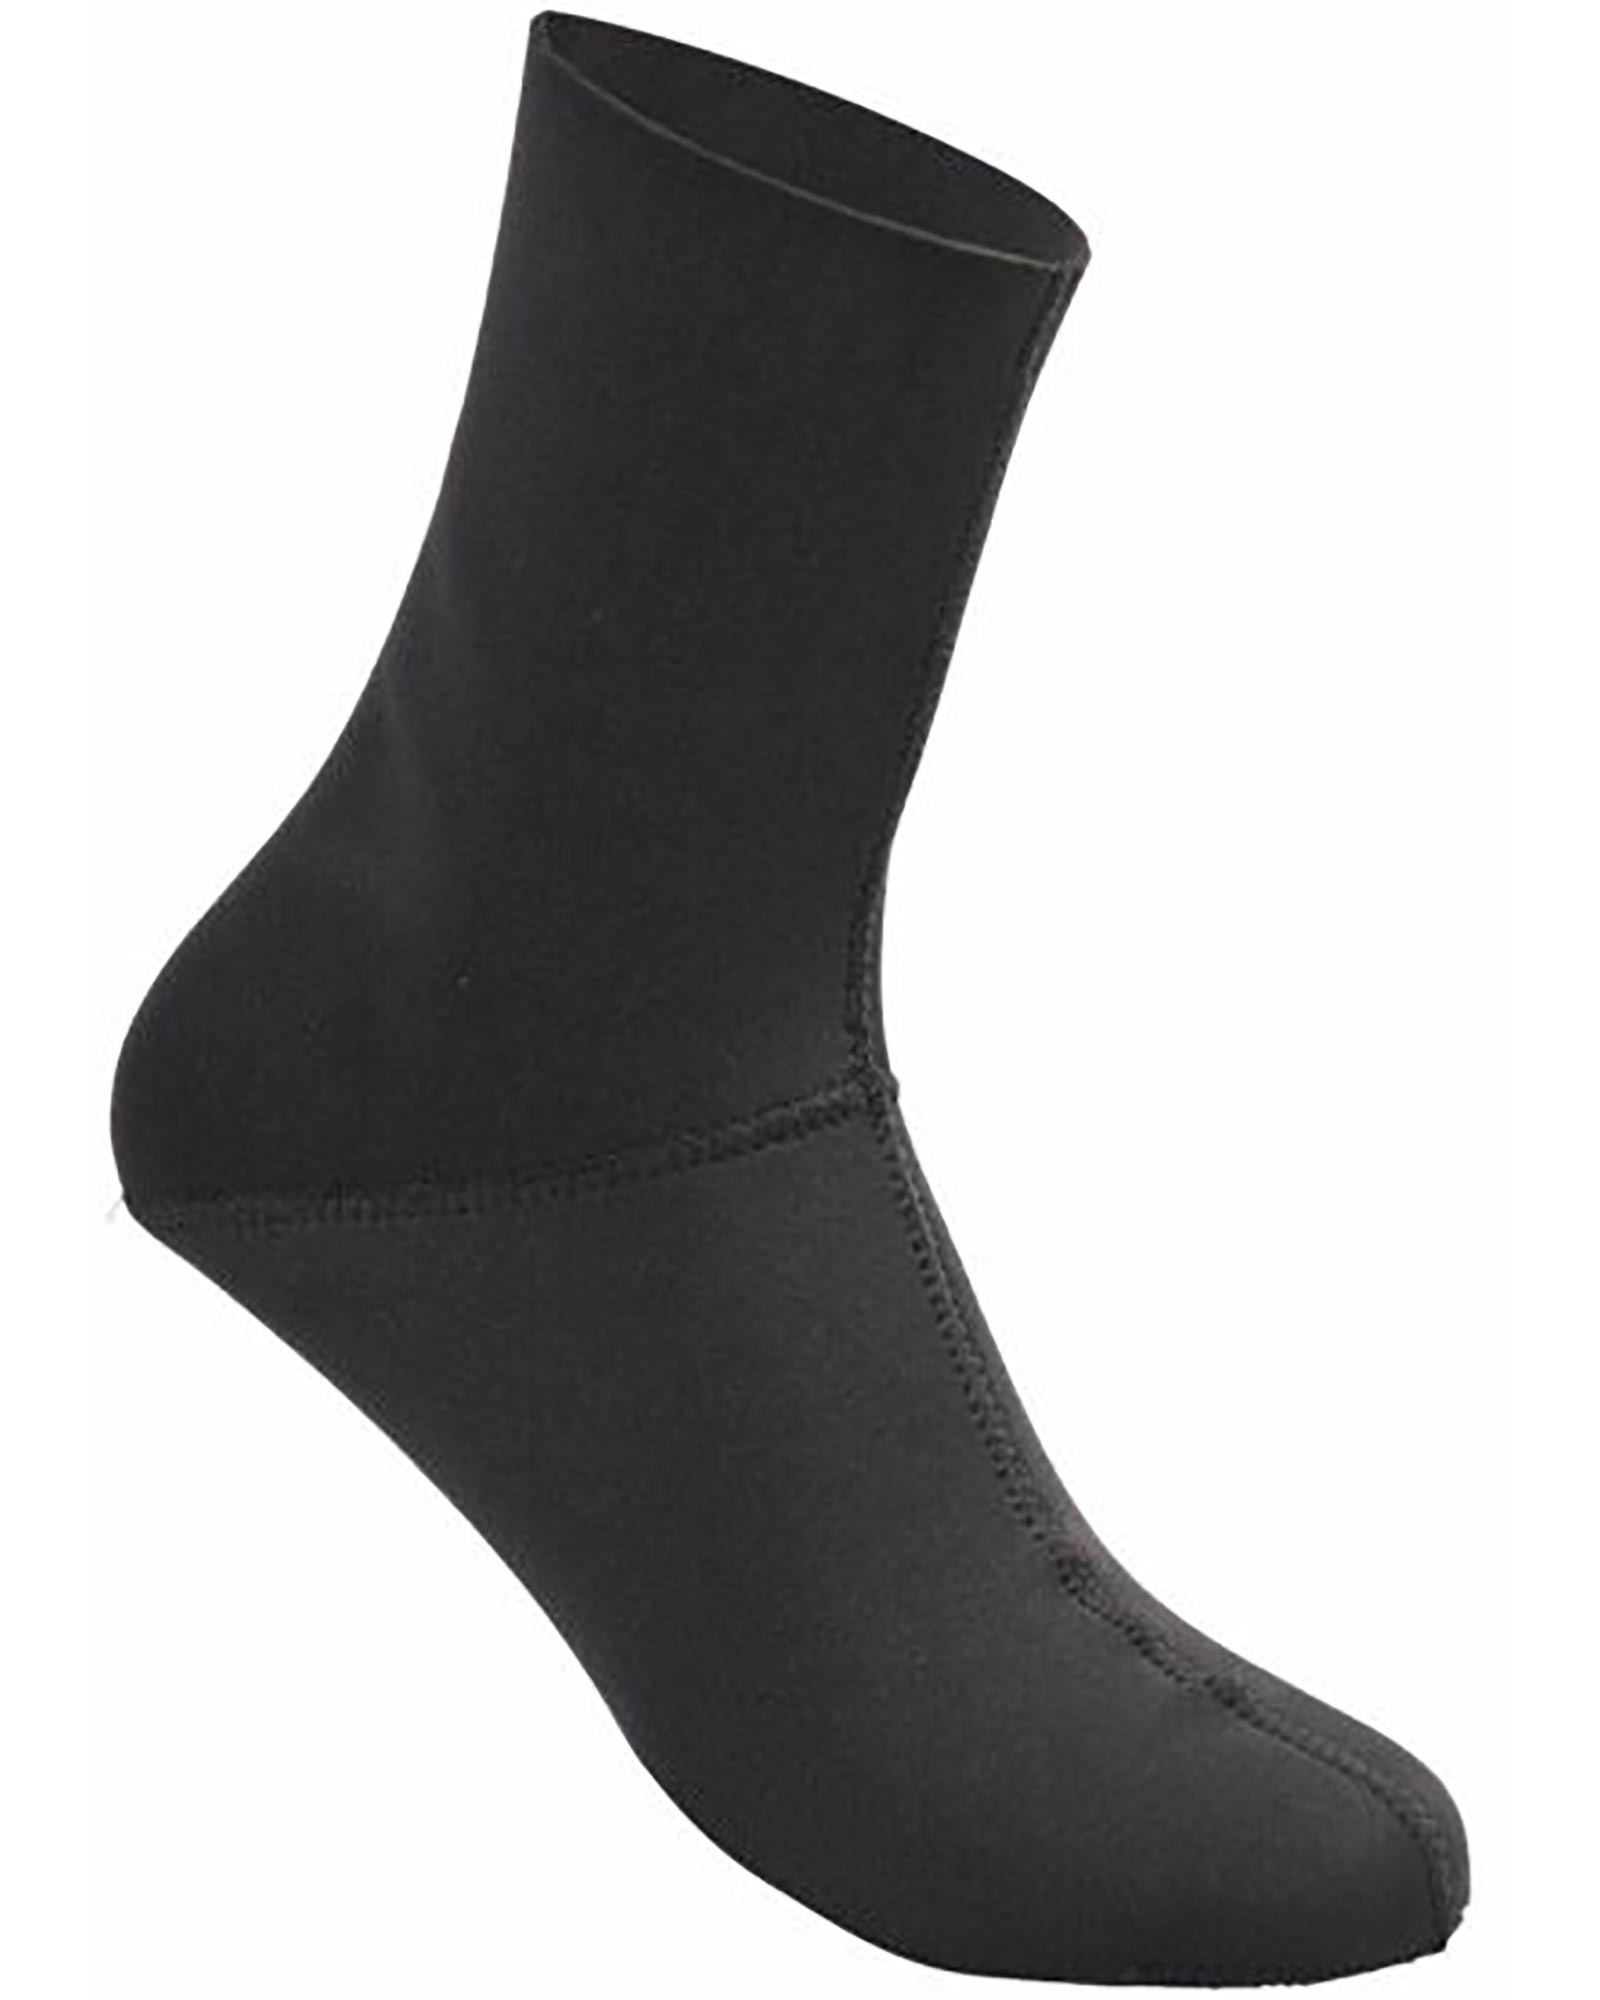 Product image of Inov-8 extreme Thermo Socks